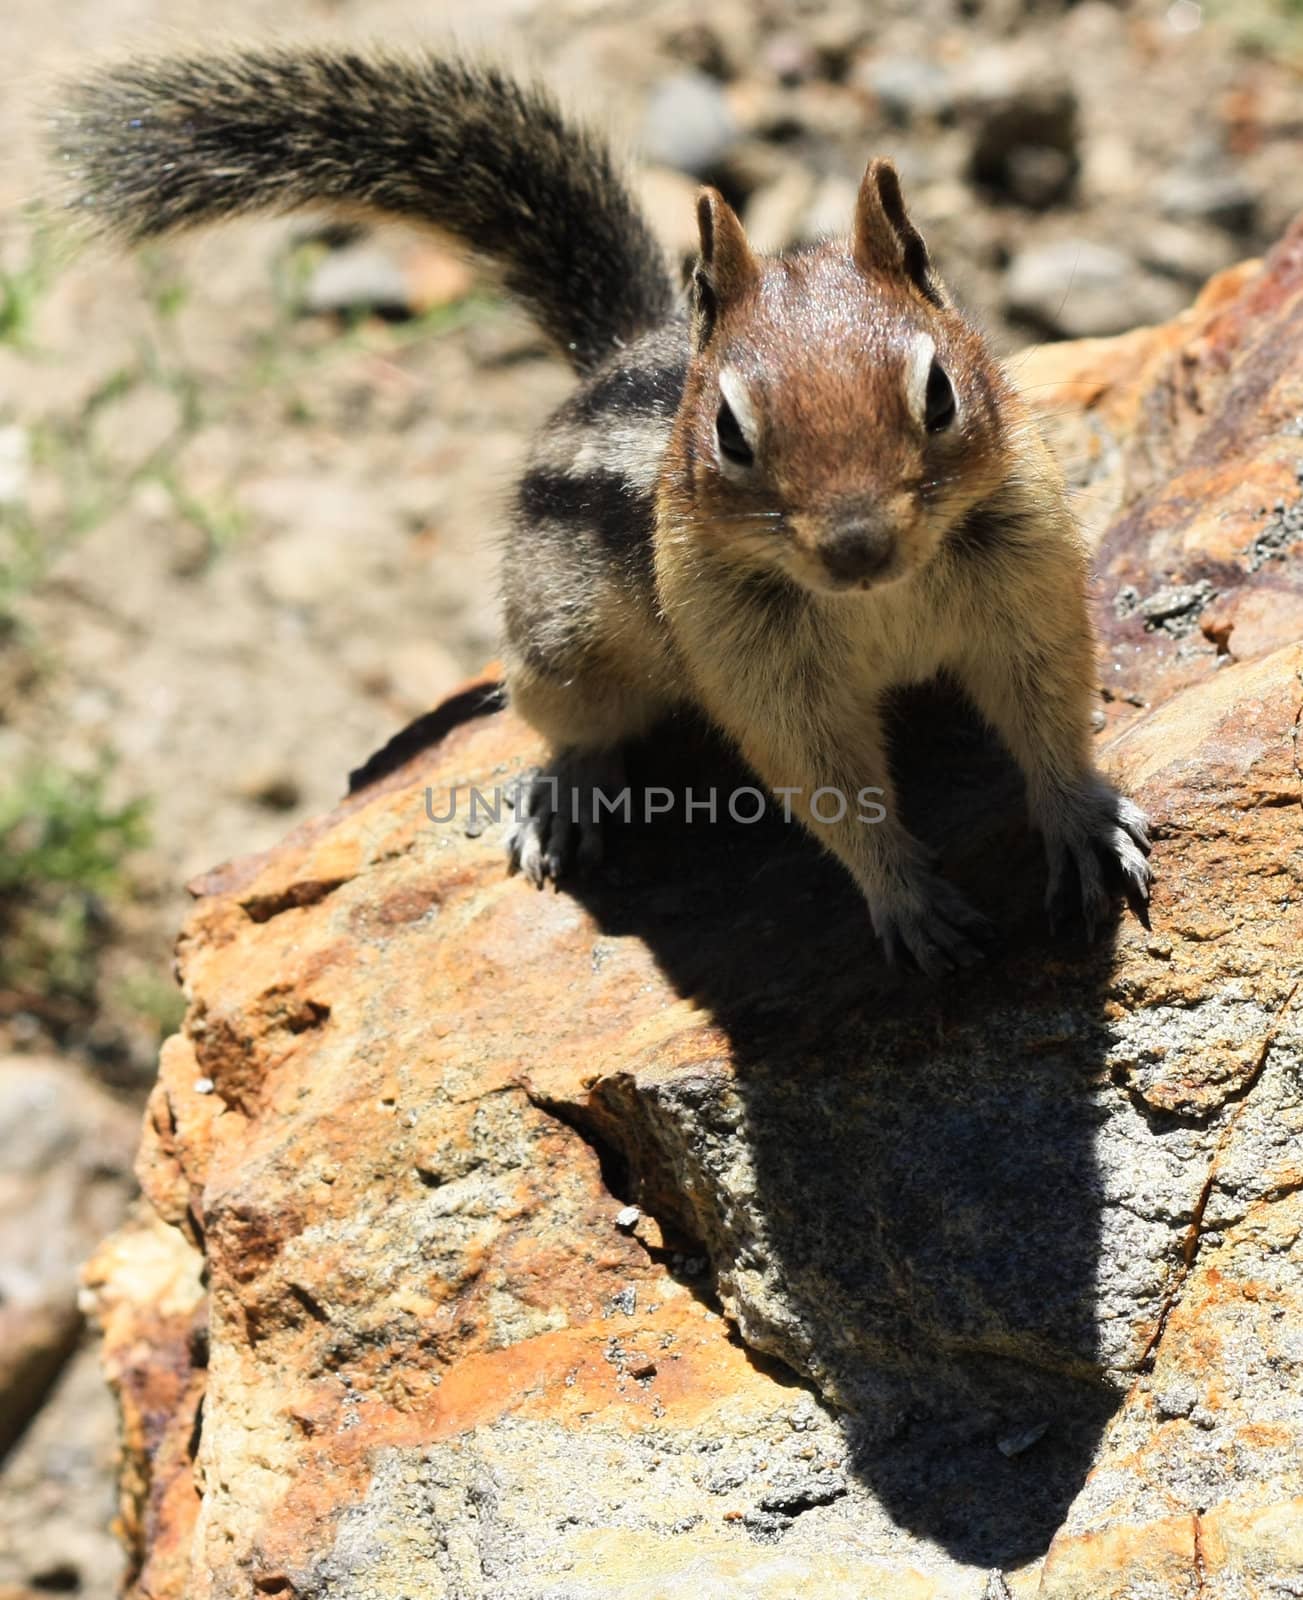 A closeup of a curious squirrel on the rock
